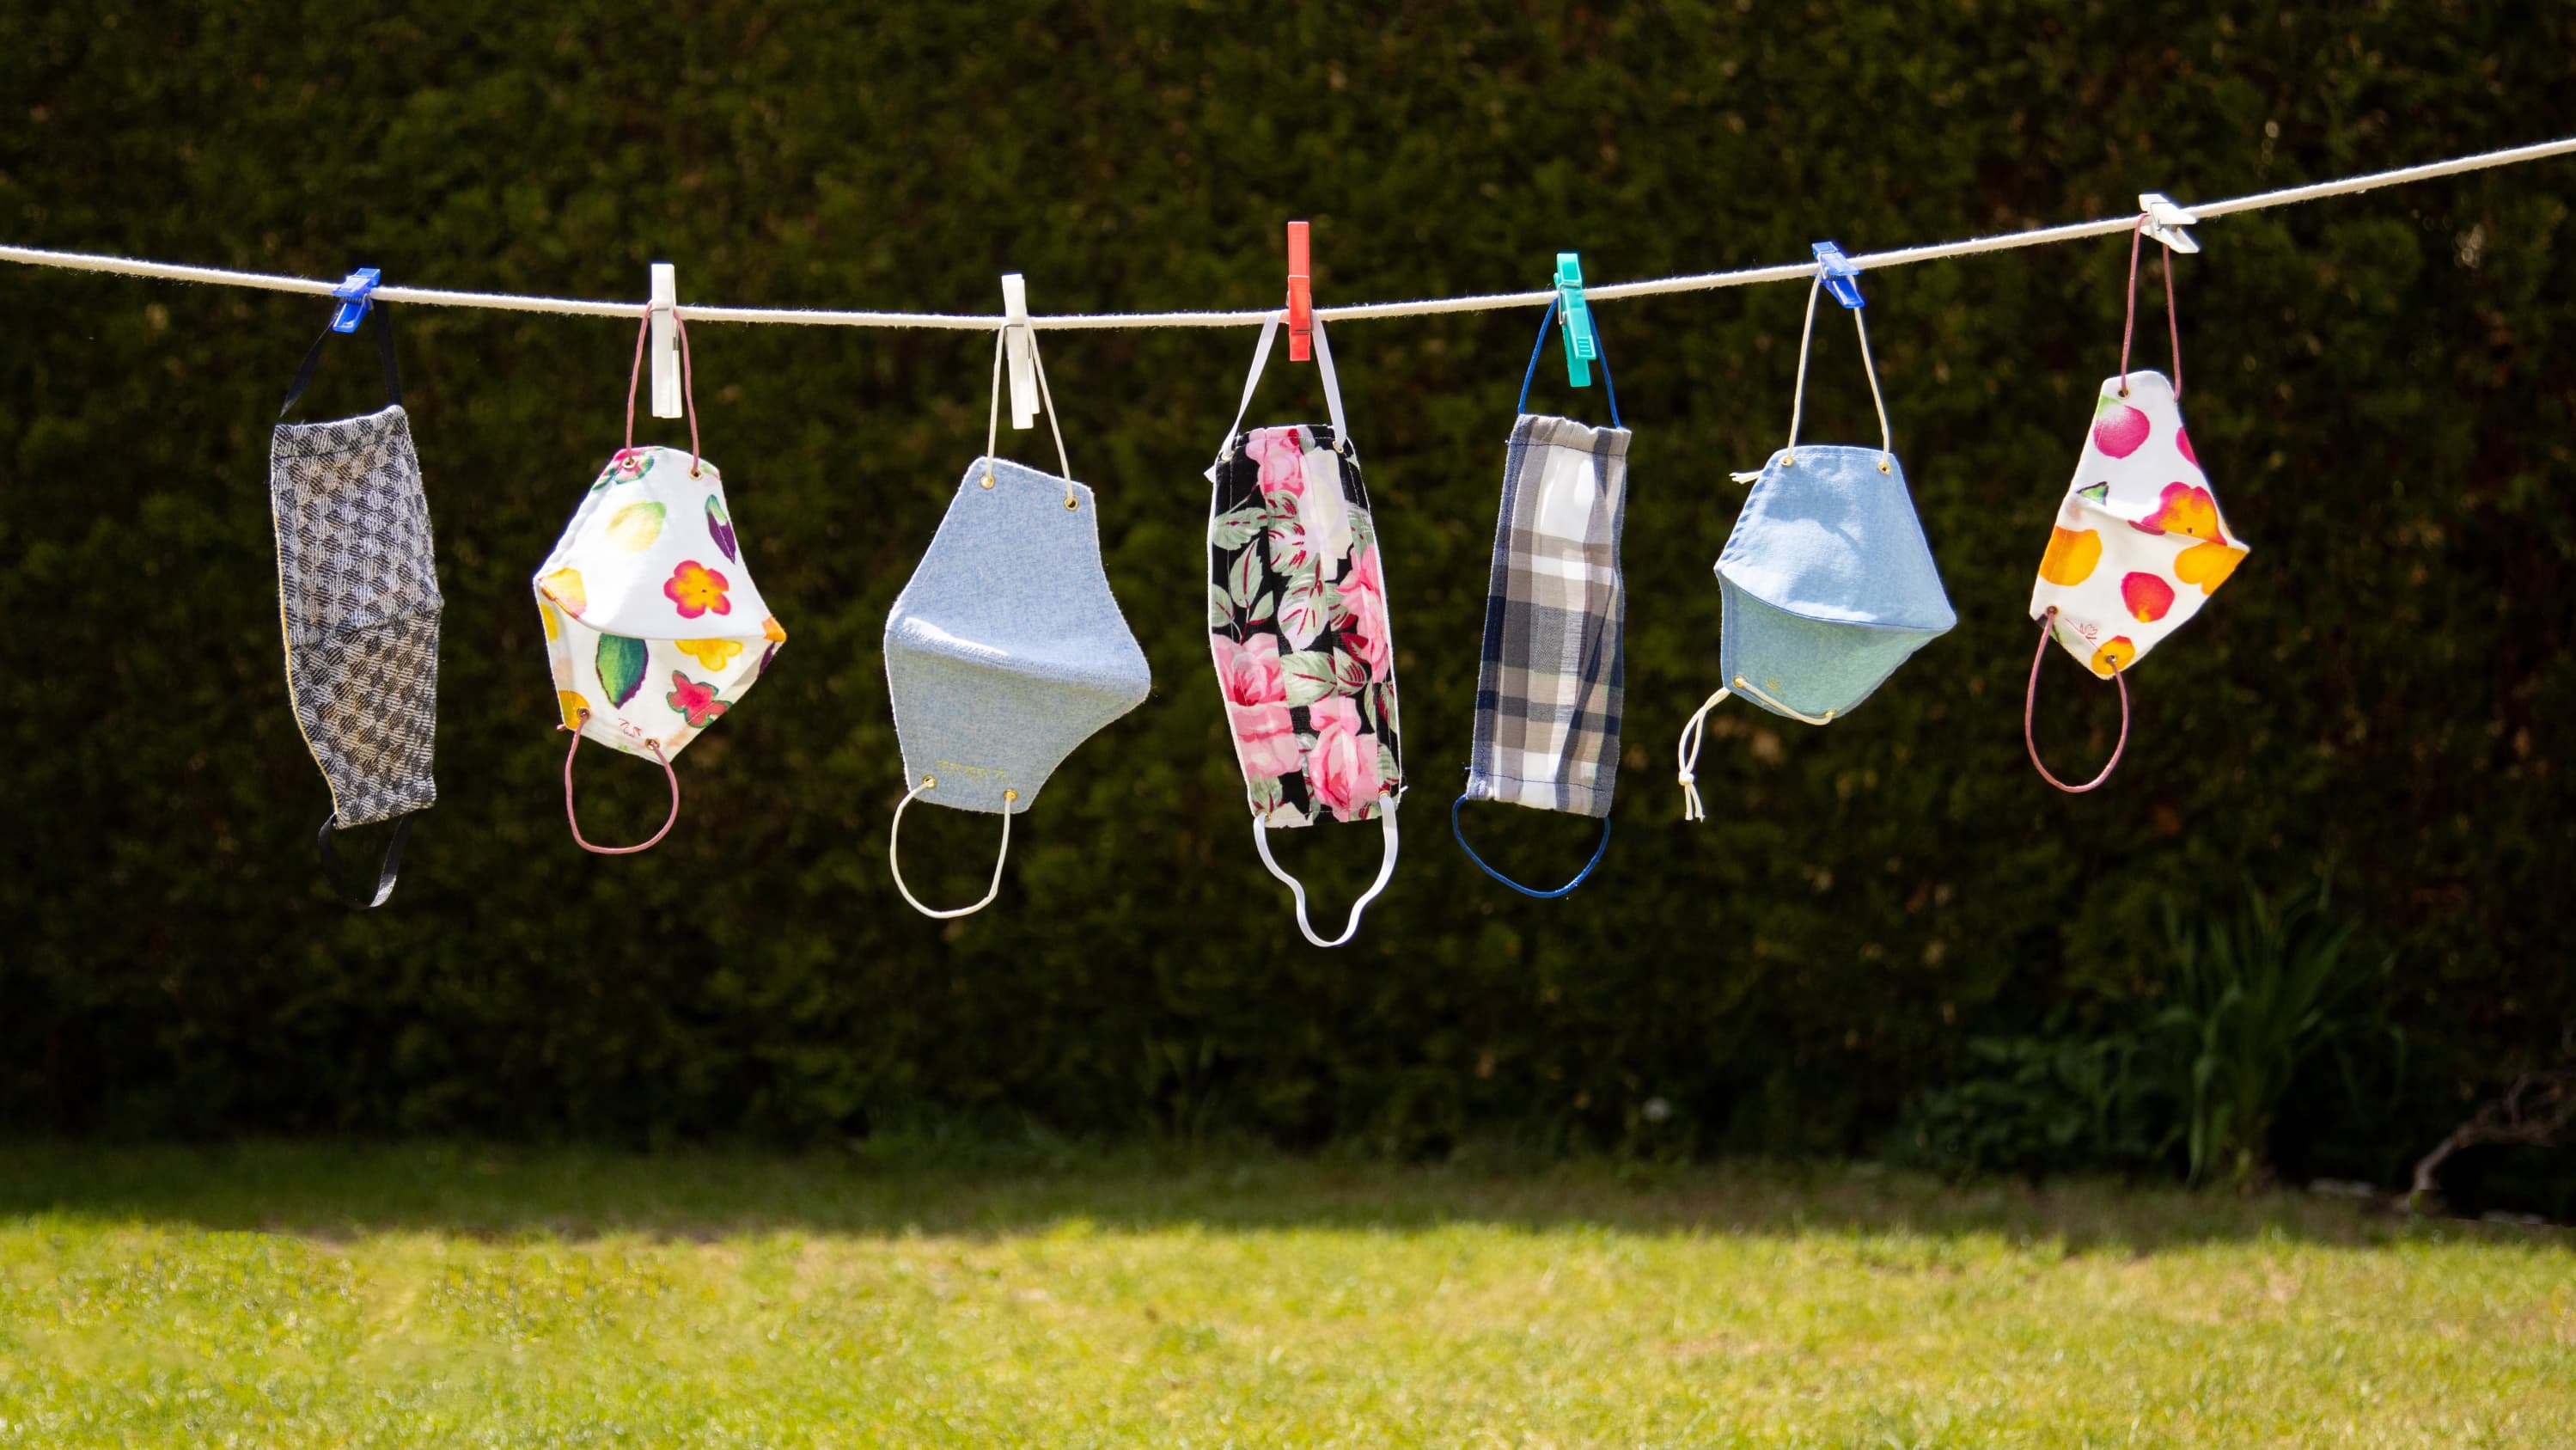 face masks on a clothes line—for more than just COVID-19 protection